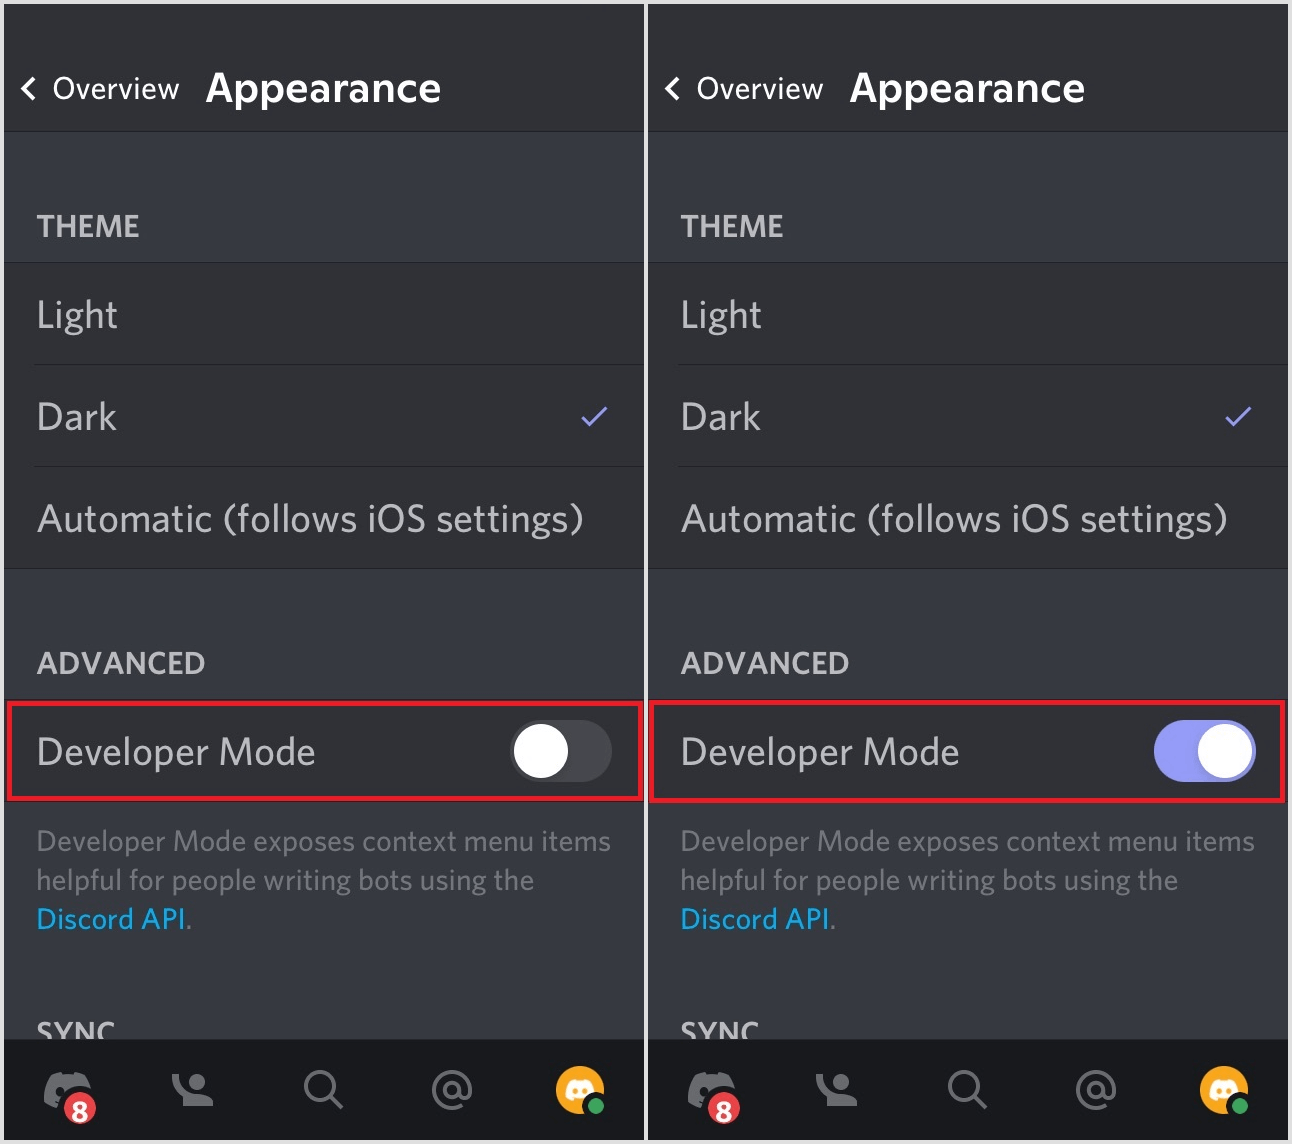 To enable the Developer Mode on Discord’s mobile app